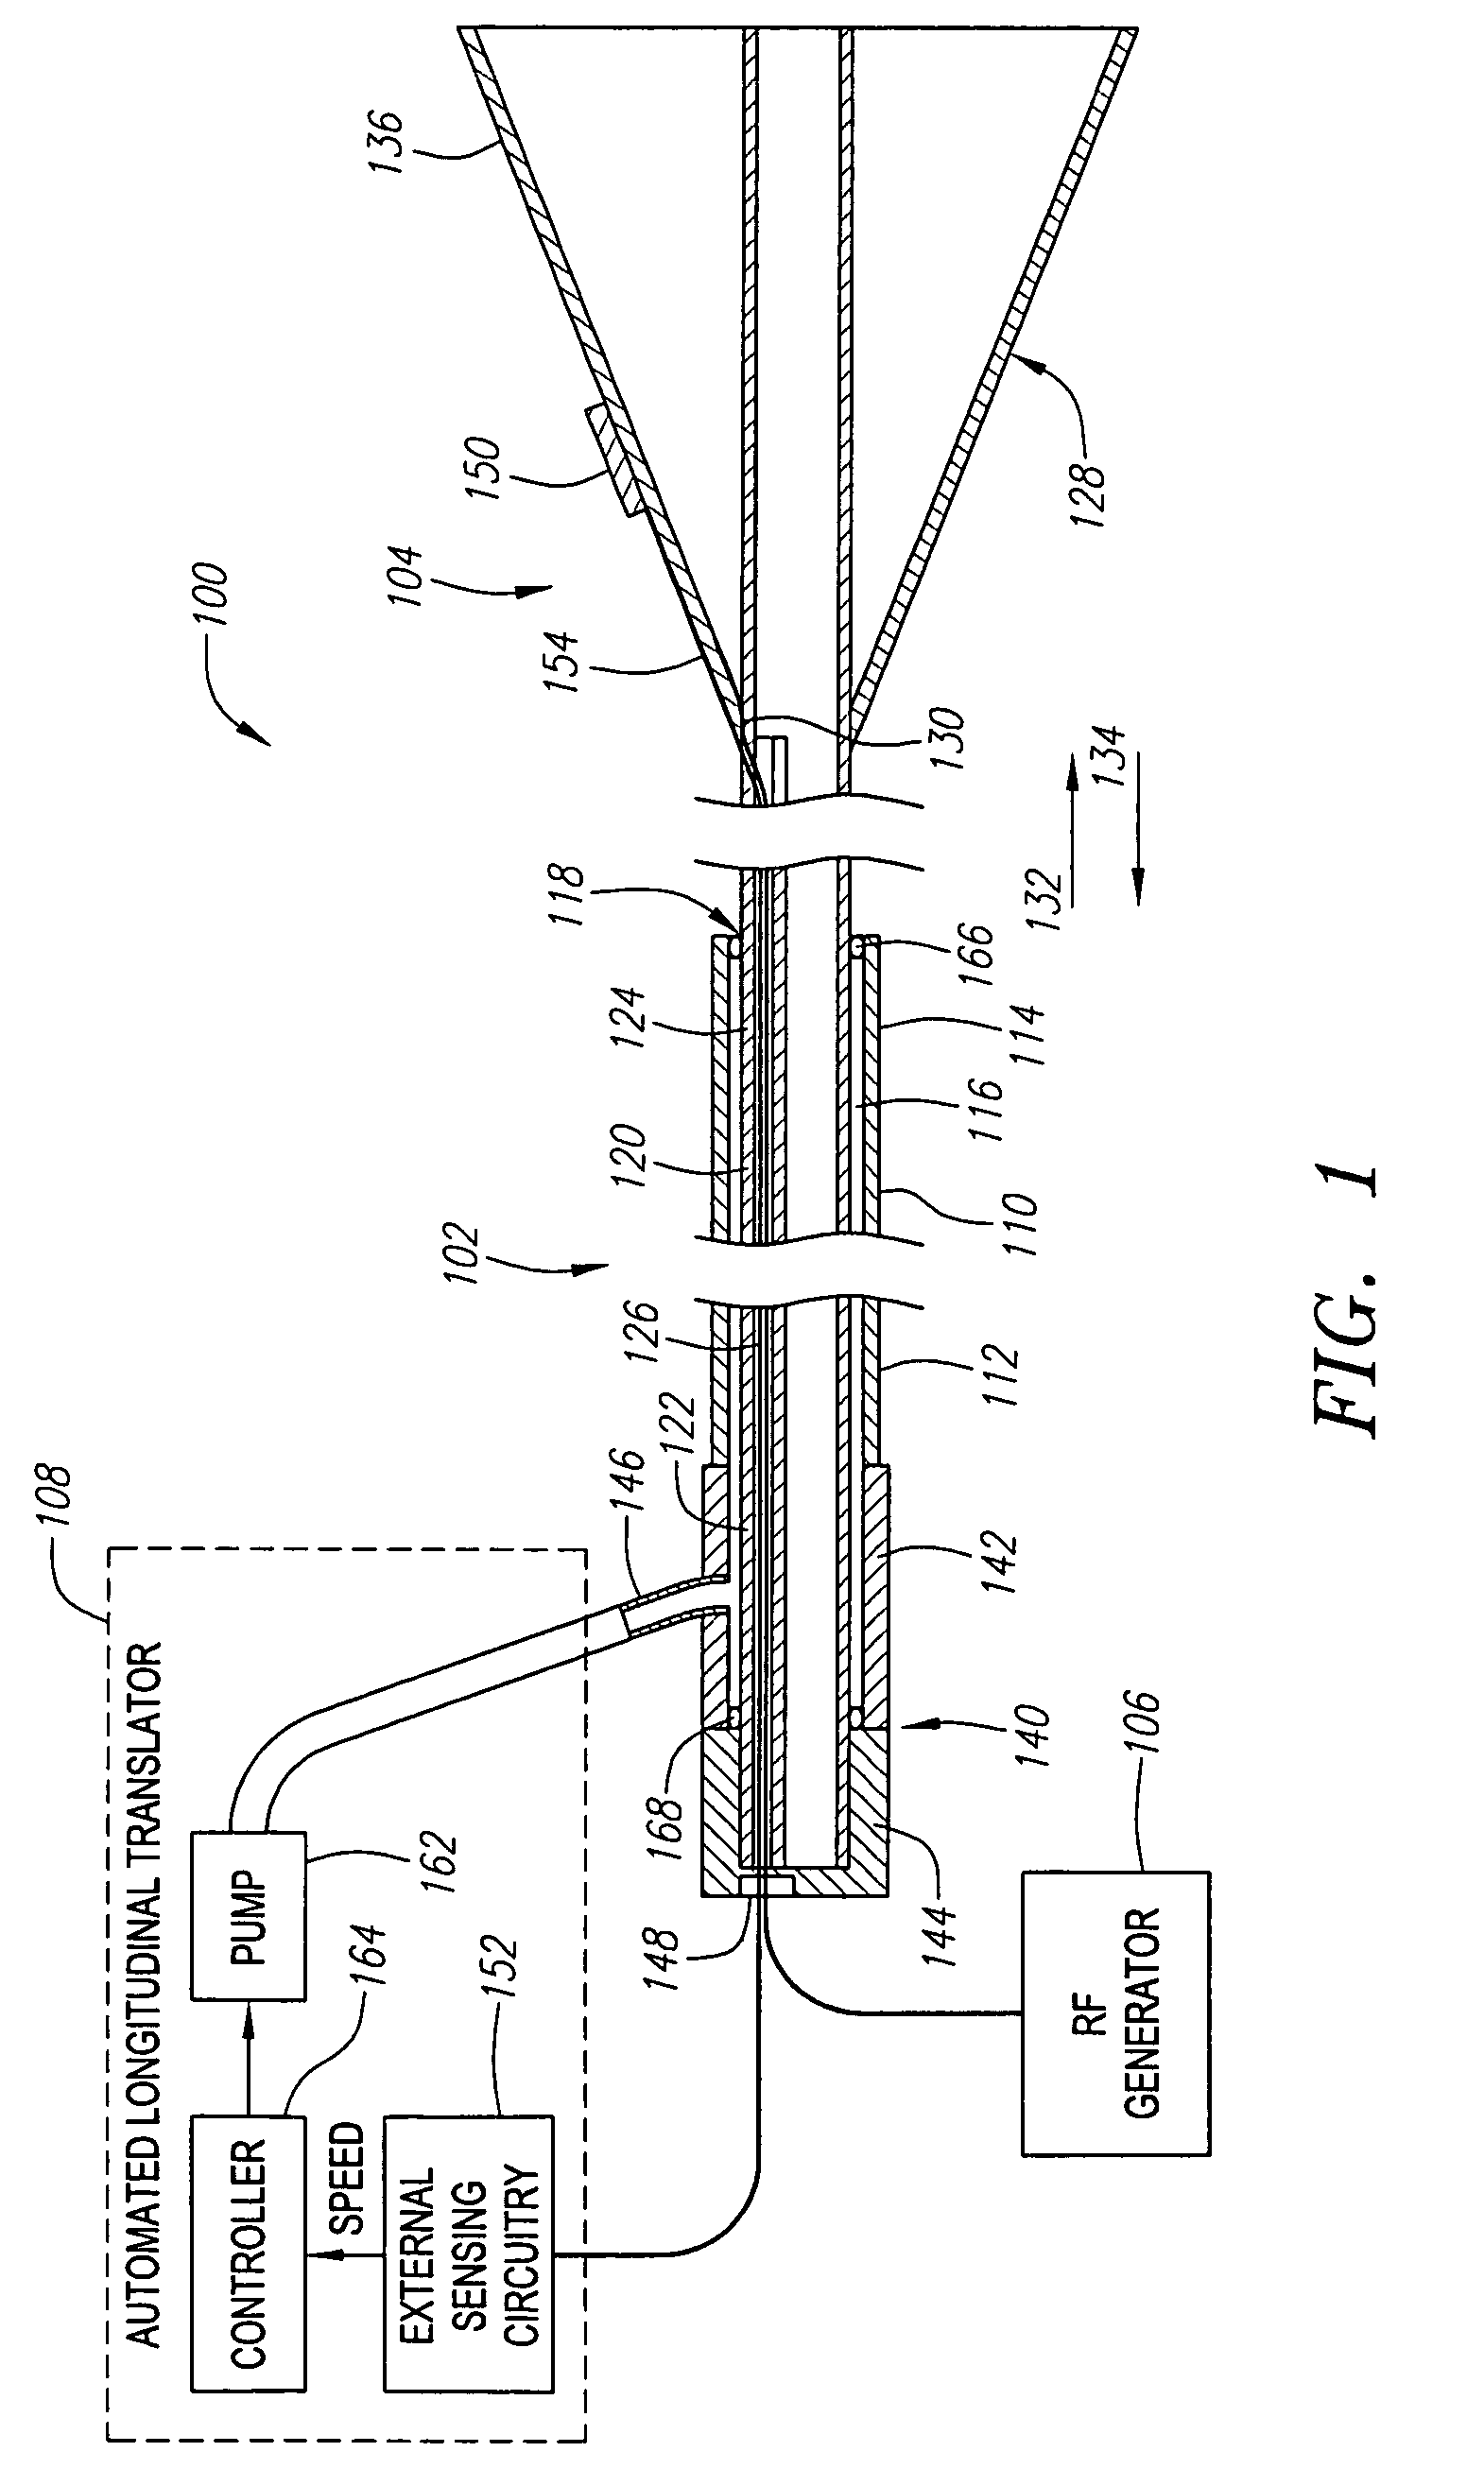 Endovenous ablation mechanism with feedback control